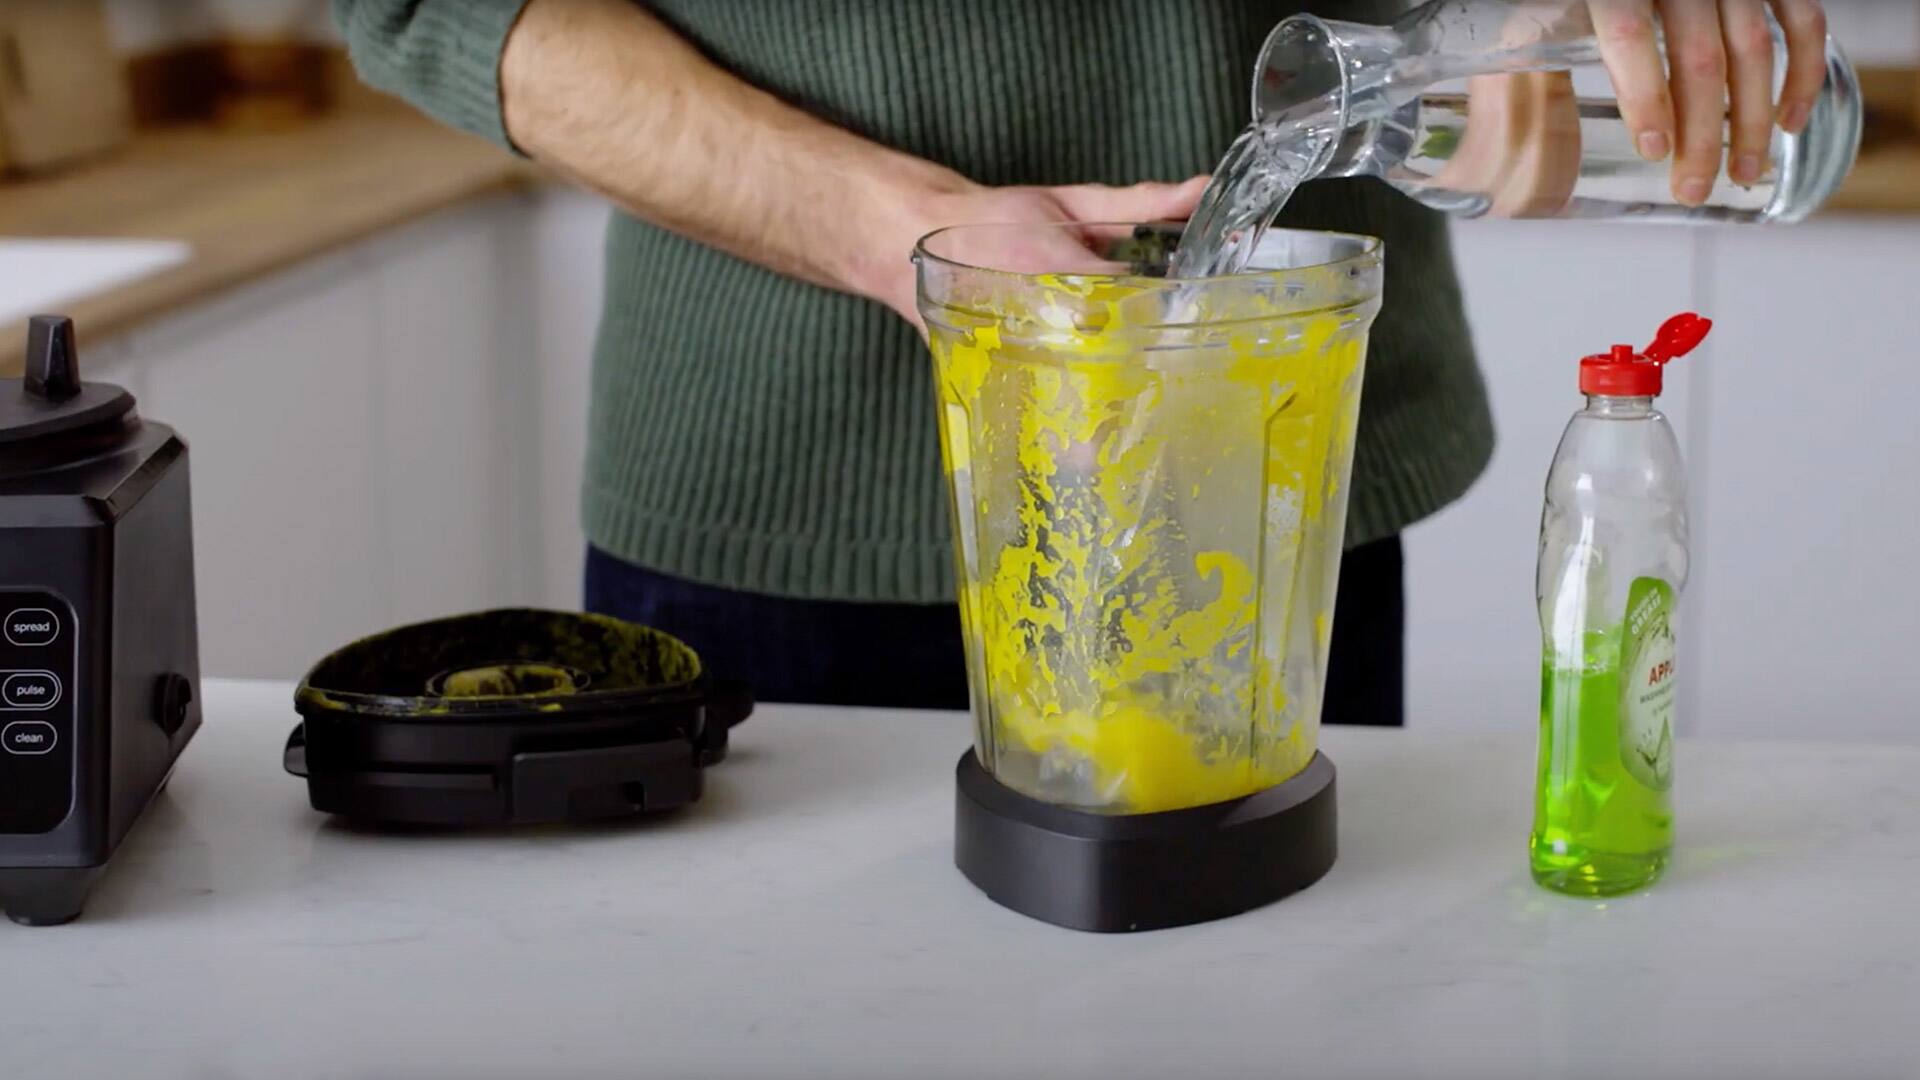 Braun PowerBlend 9 - How to clean your blender